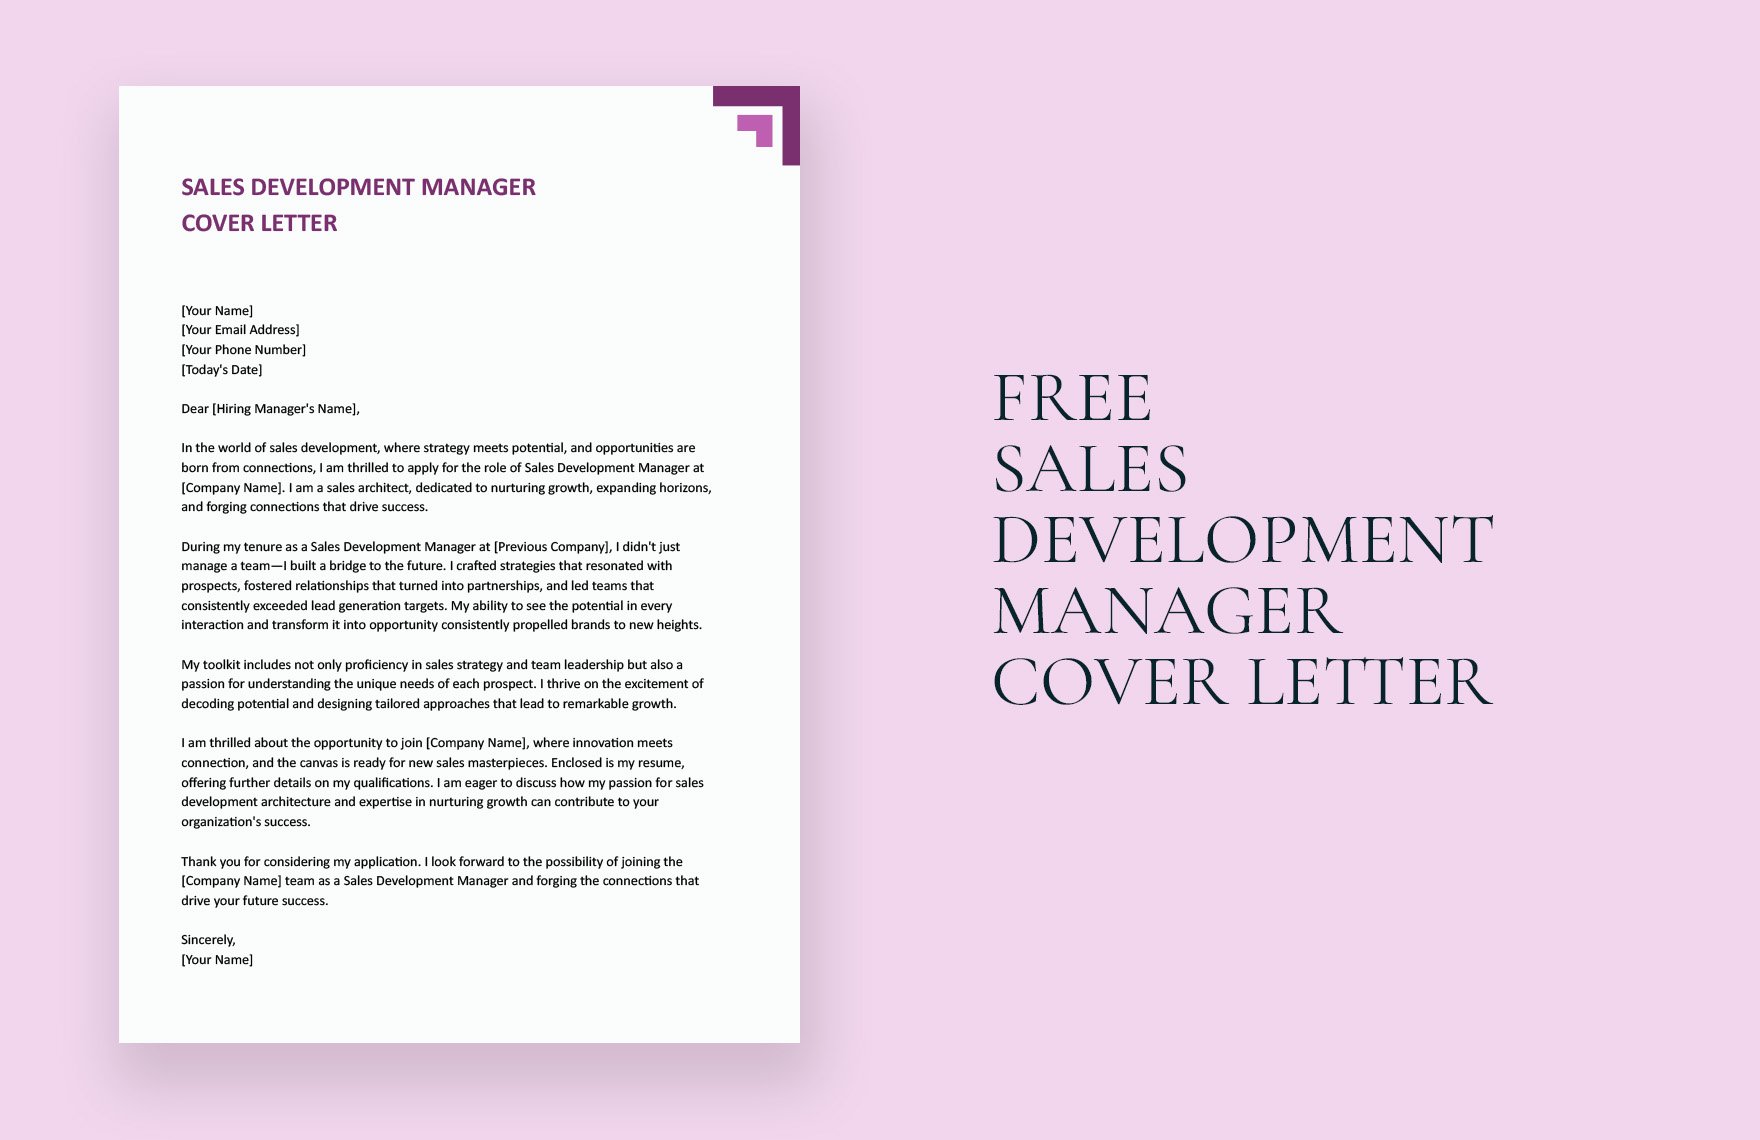 Sales Development Manager Cover Letter